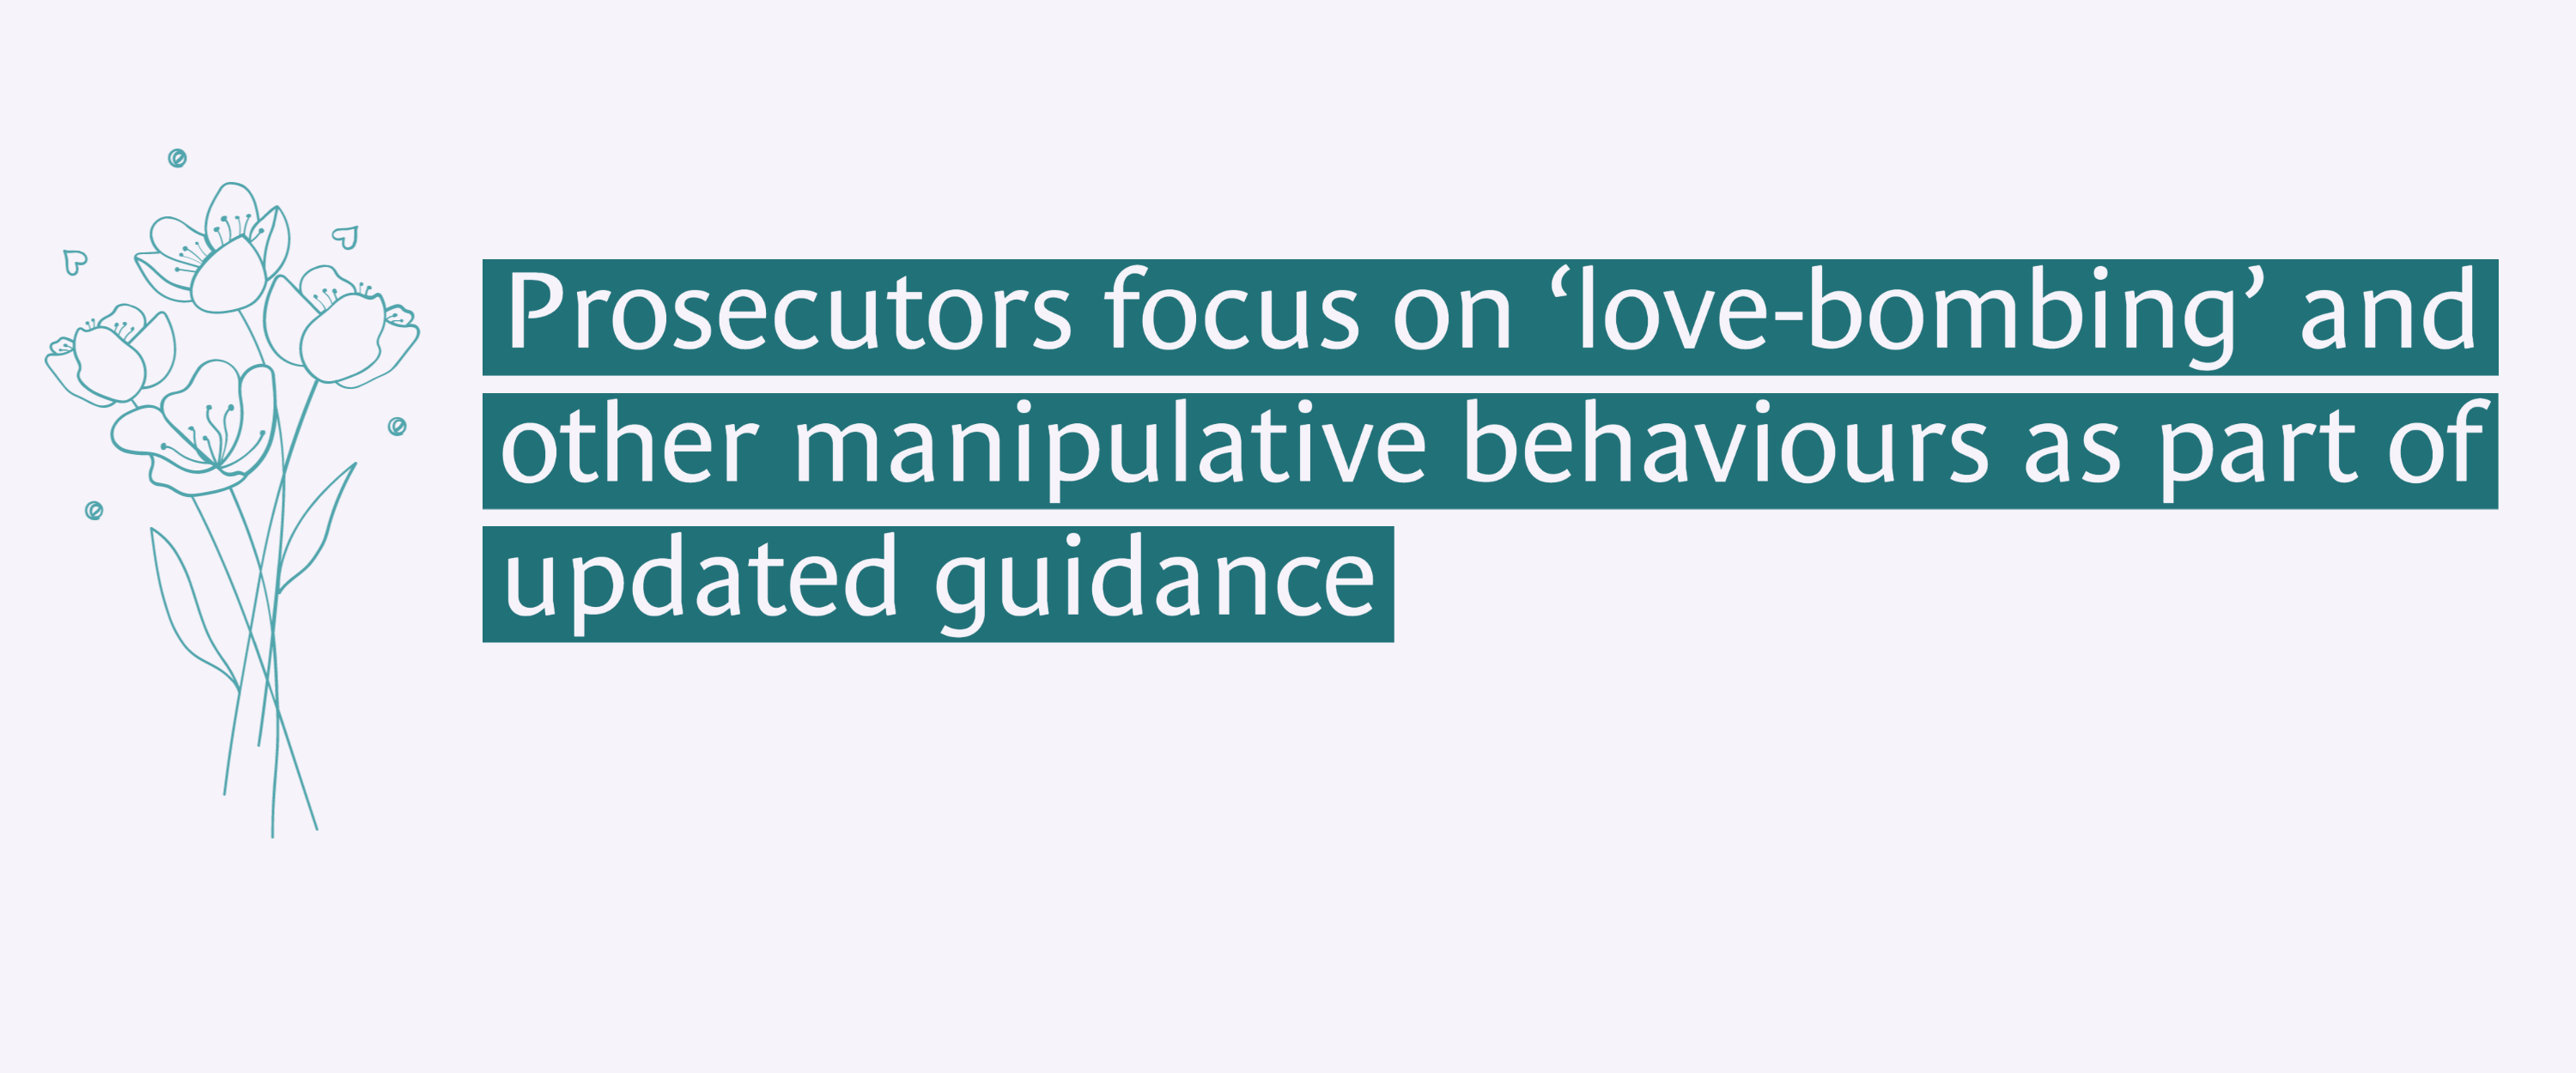 'Prosecutors focus on ‘love-bombing’ and other manipulative behaviours as part of updated guidance'